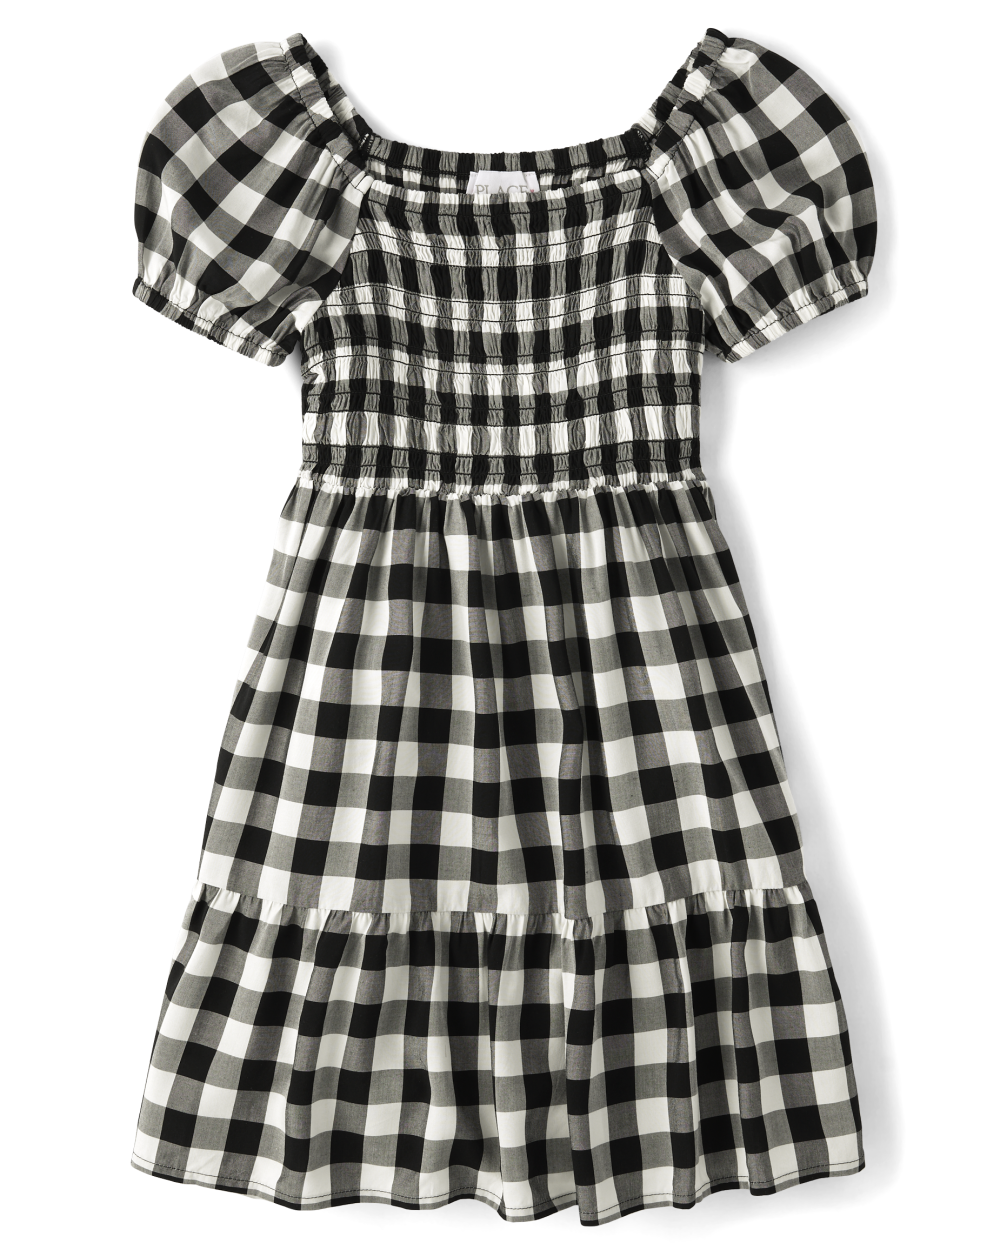 Girls Smocked Square Neck Rayon Above the Knee Checkered Gingham Print Puff Sleeves Short Sleeves Sleeves Dress With Ruffles